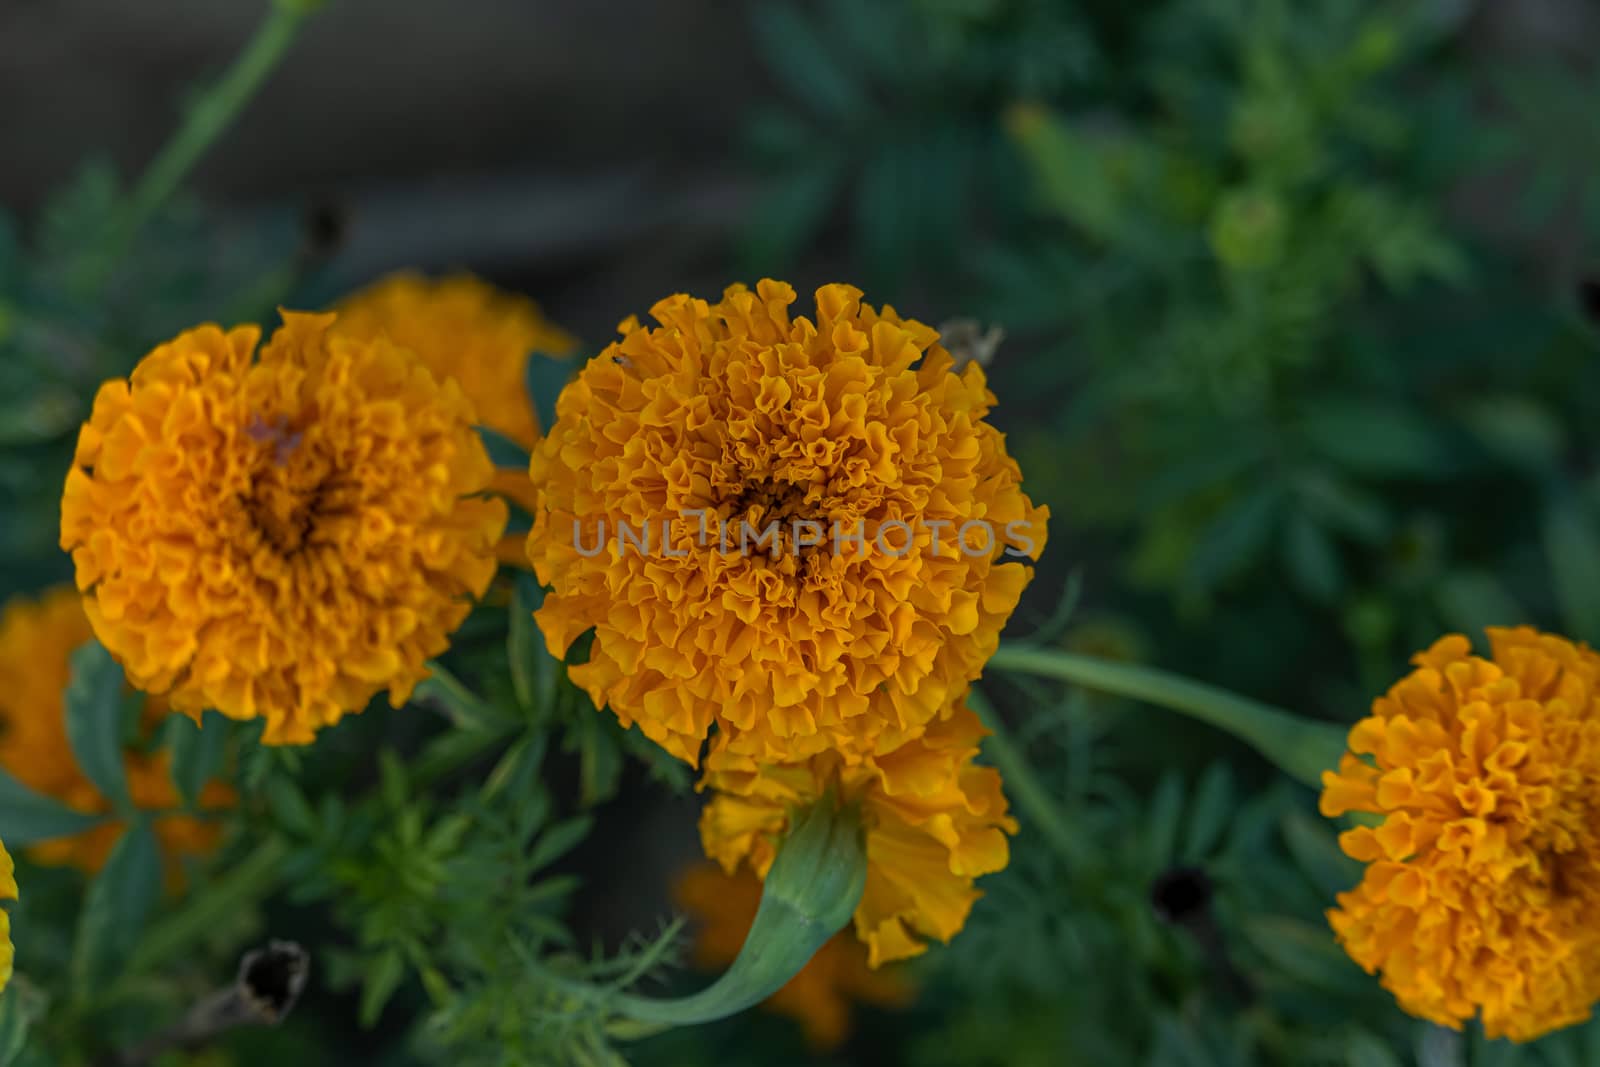 A blend of soft focus and vintage effect on the native marigold in winter